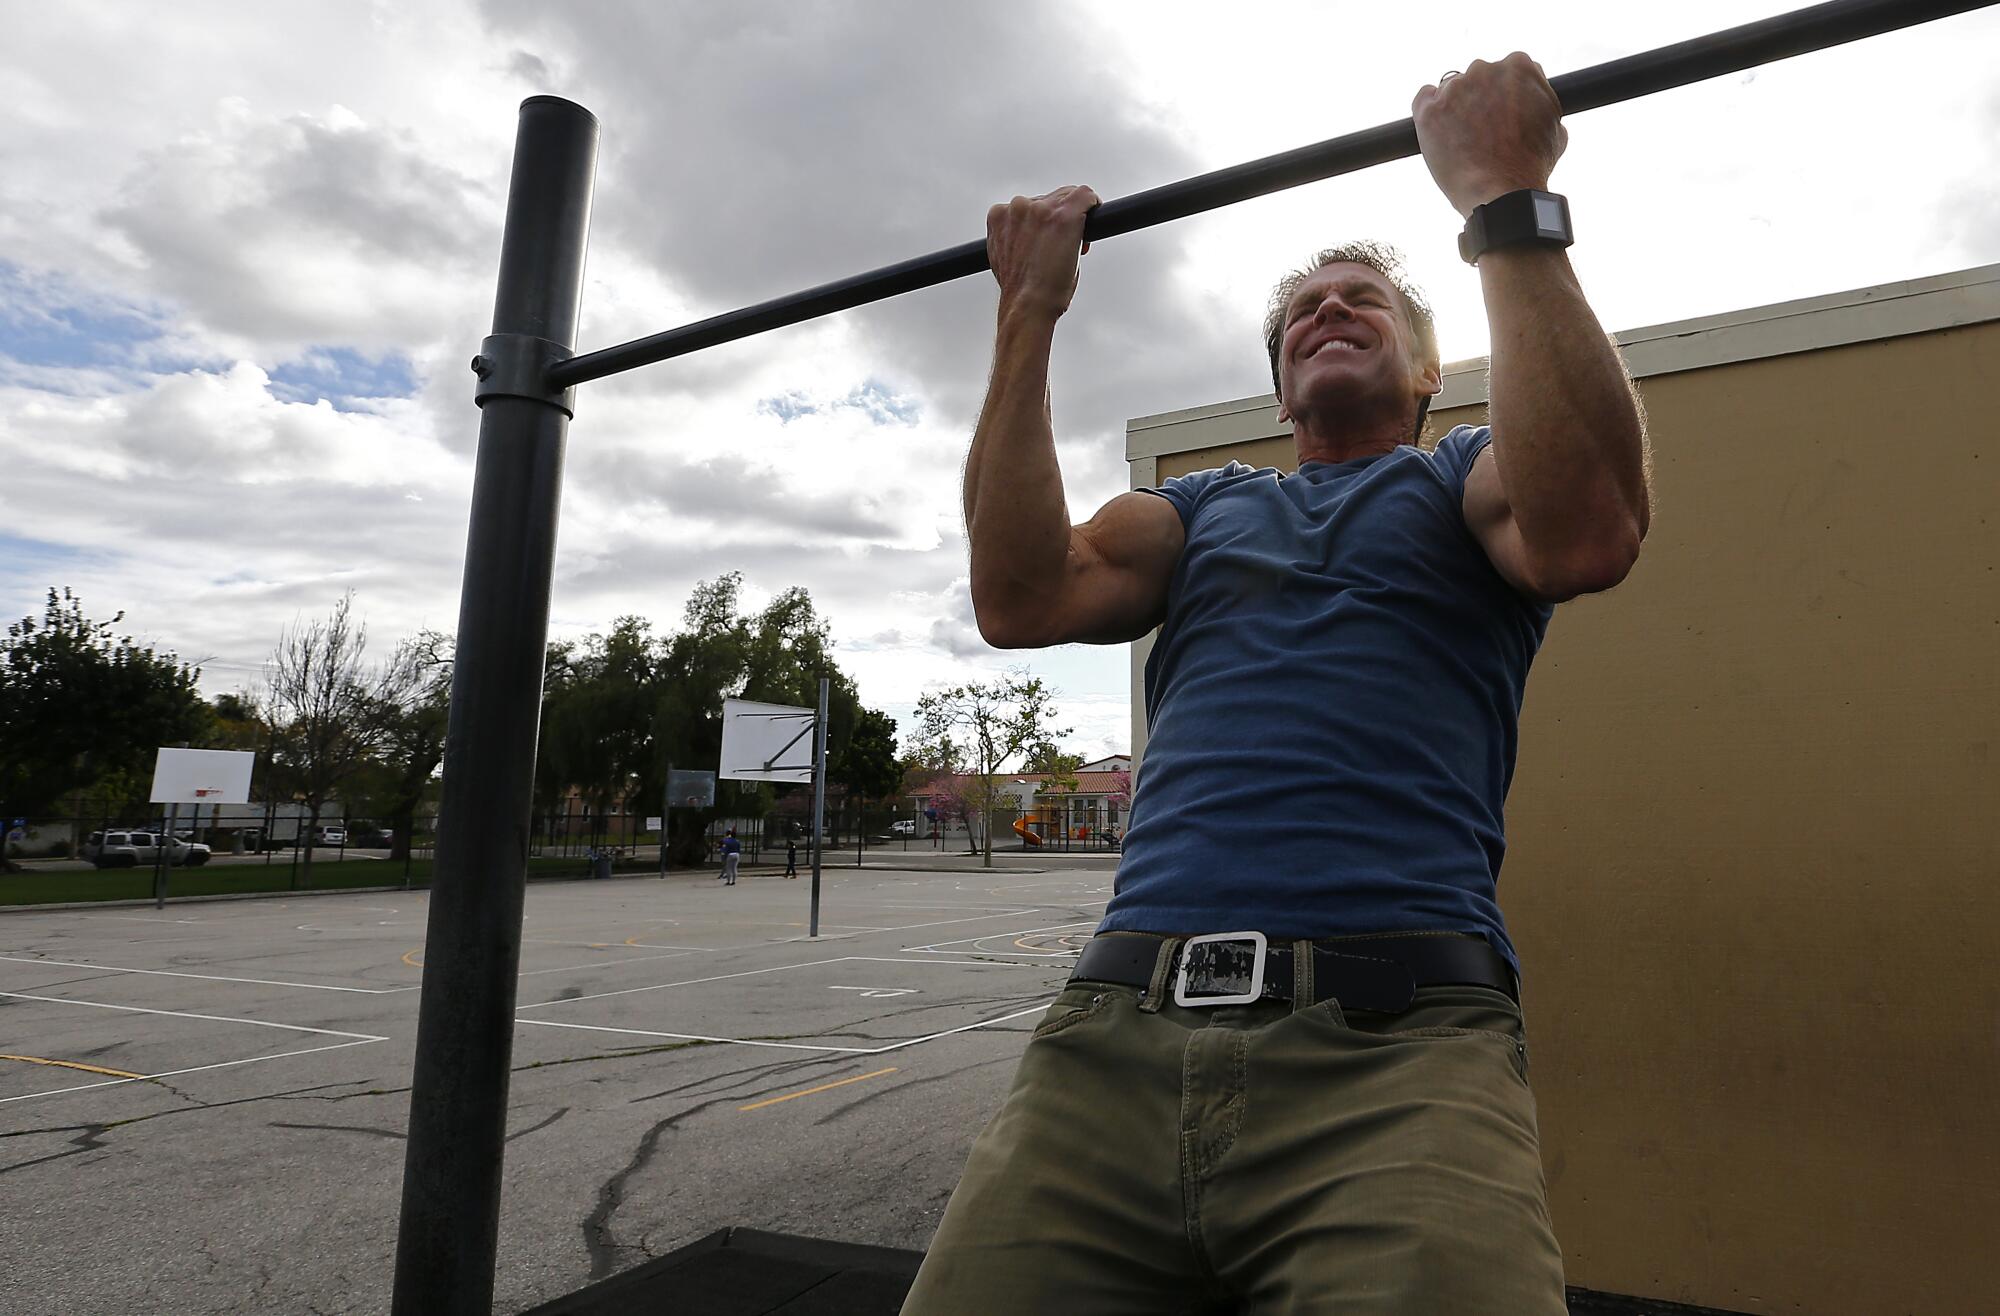 Mike Lynn grimaces as he does a pull-up on playground exercise equipment.